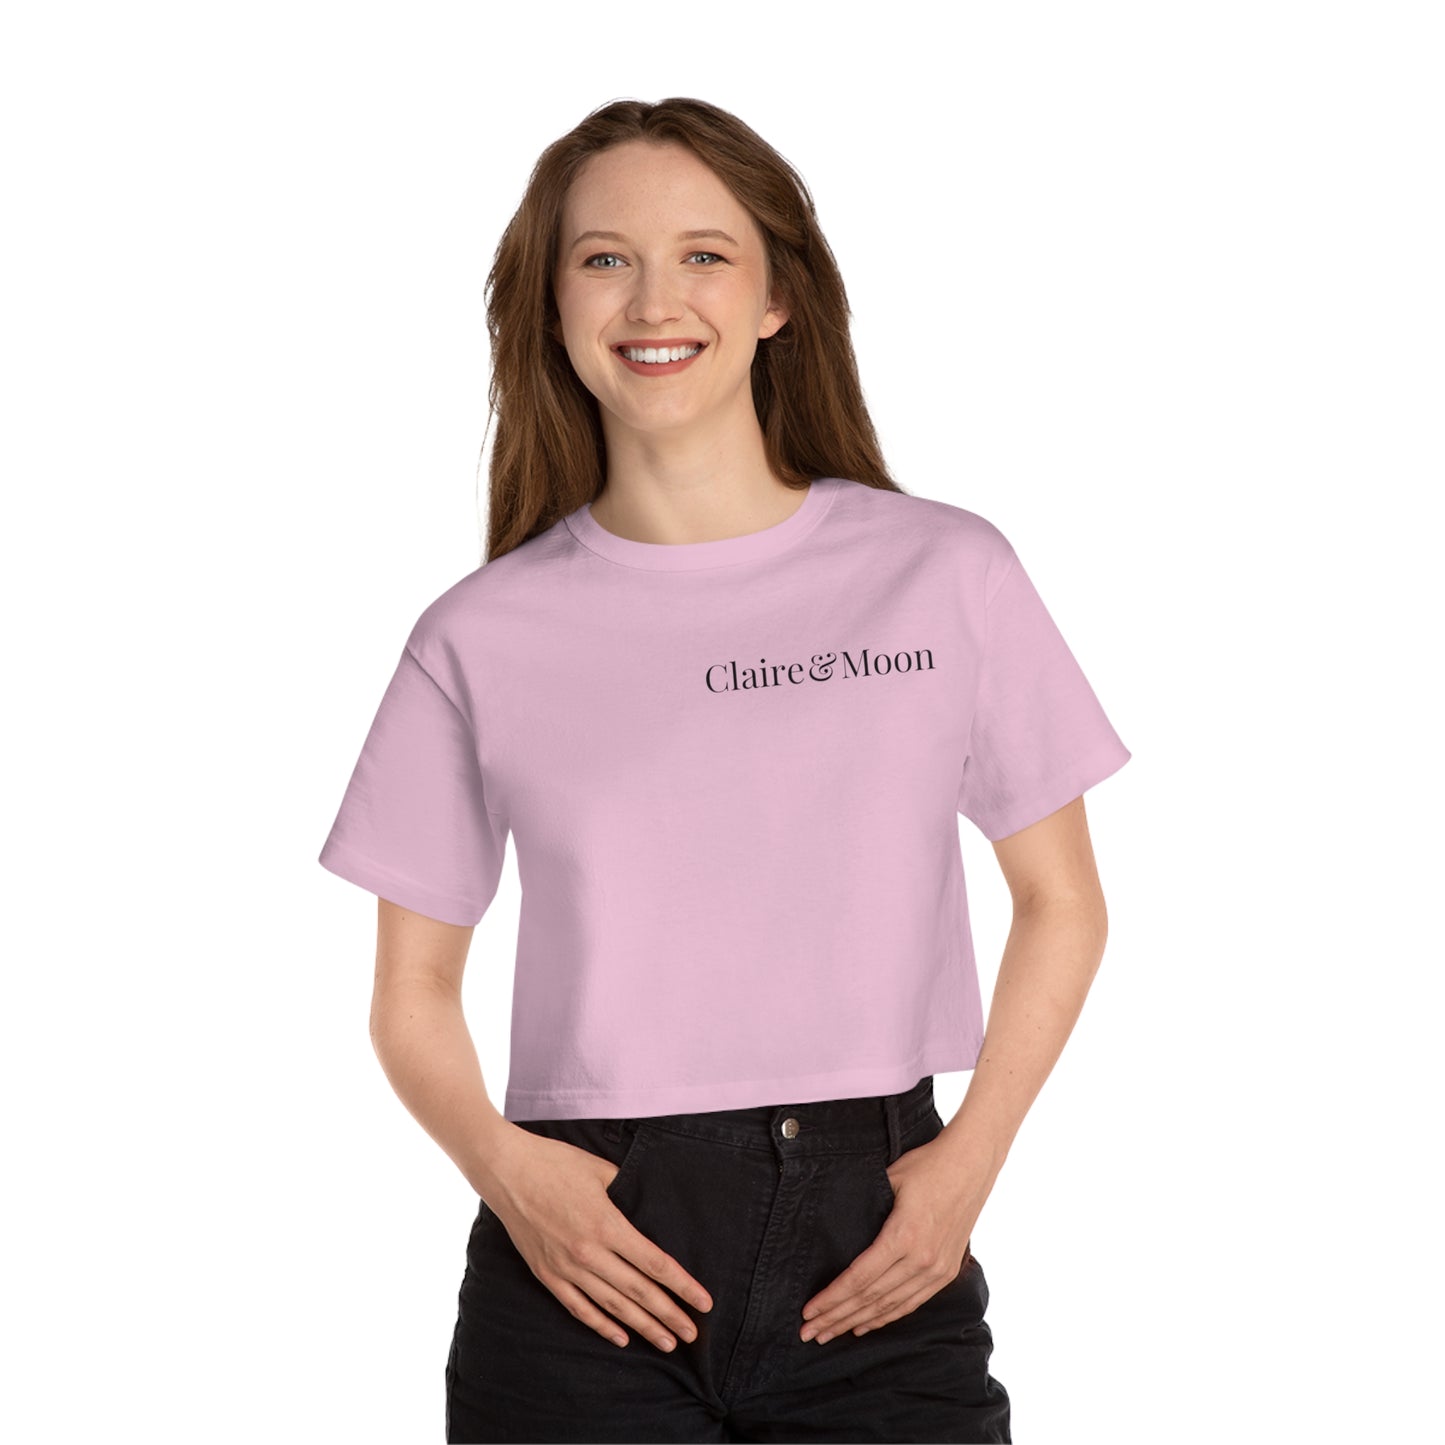 Claireandmoon Logo Champion Women's Heritage Cropped T-Shirt